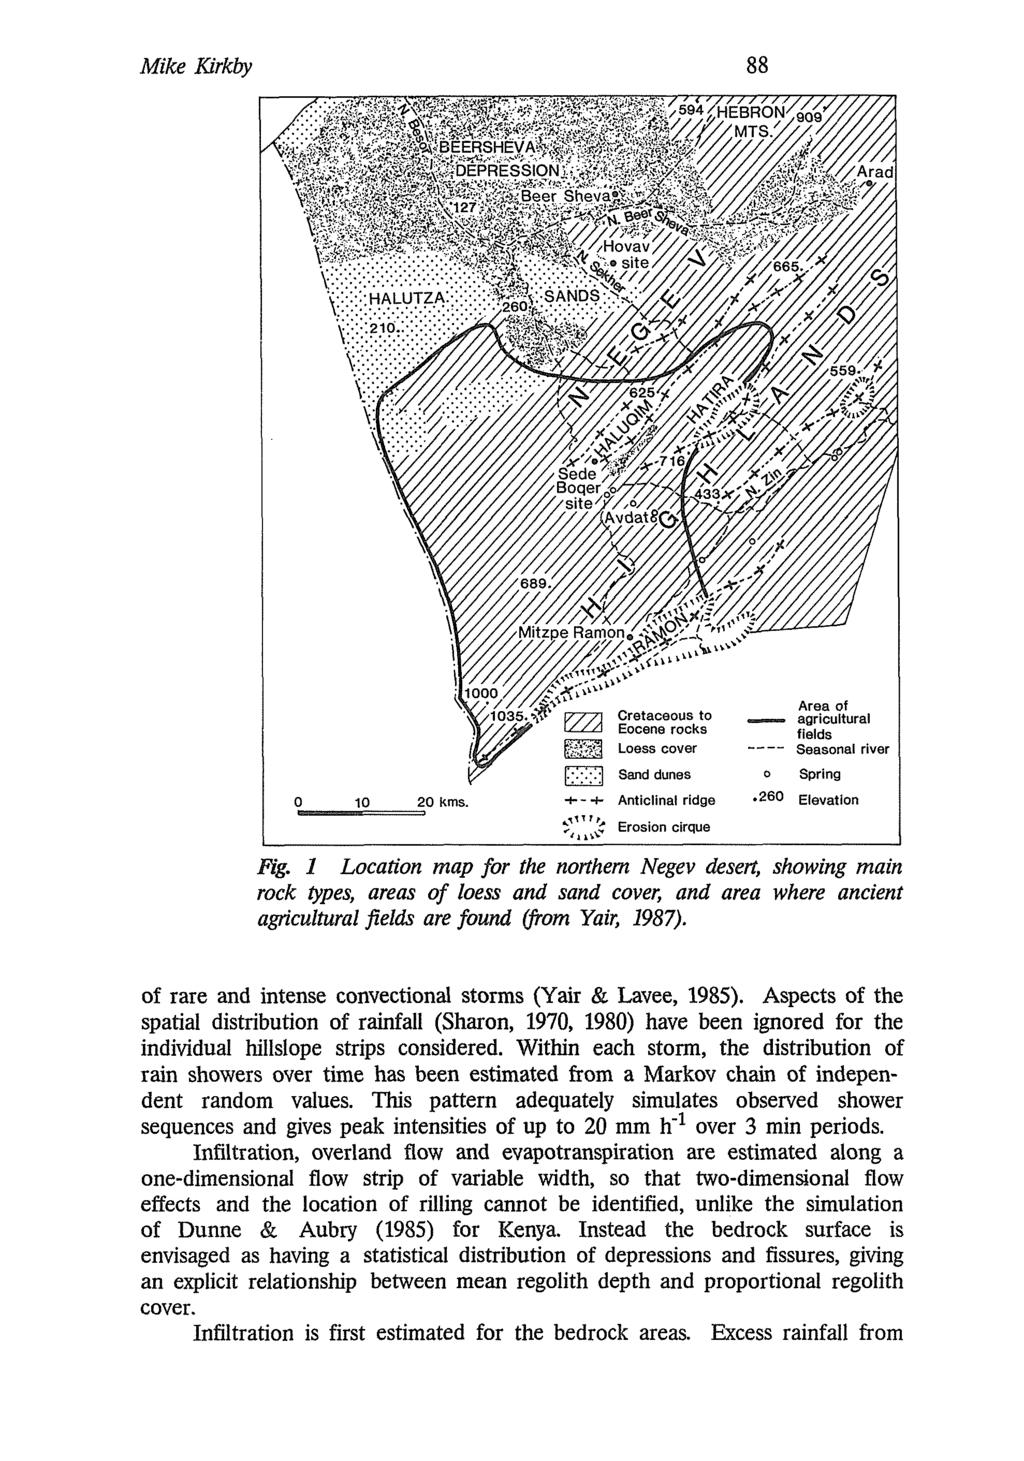 Mike Kirkby 88 Ng. 1 Location map for the northern Negev desert, showing main rock types, areas of loess and sand cover, and area where ancient agriculturalfieldsare found (from Yair, 1987).